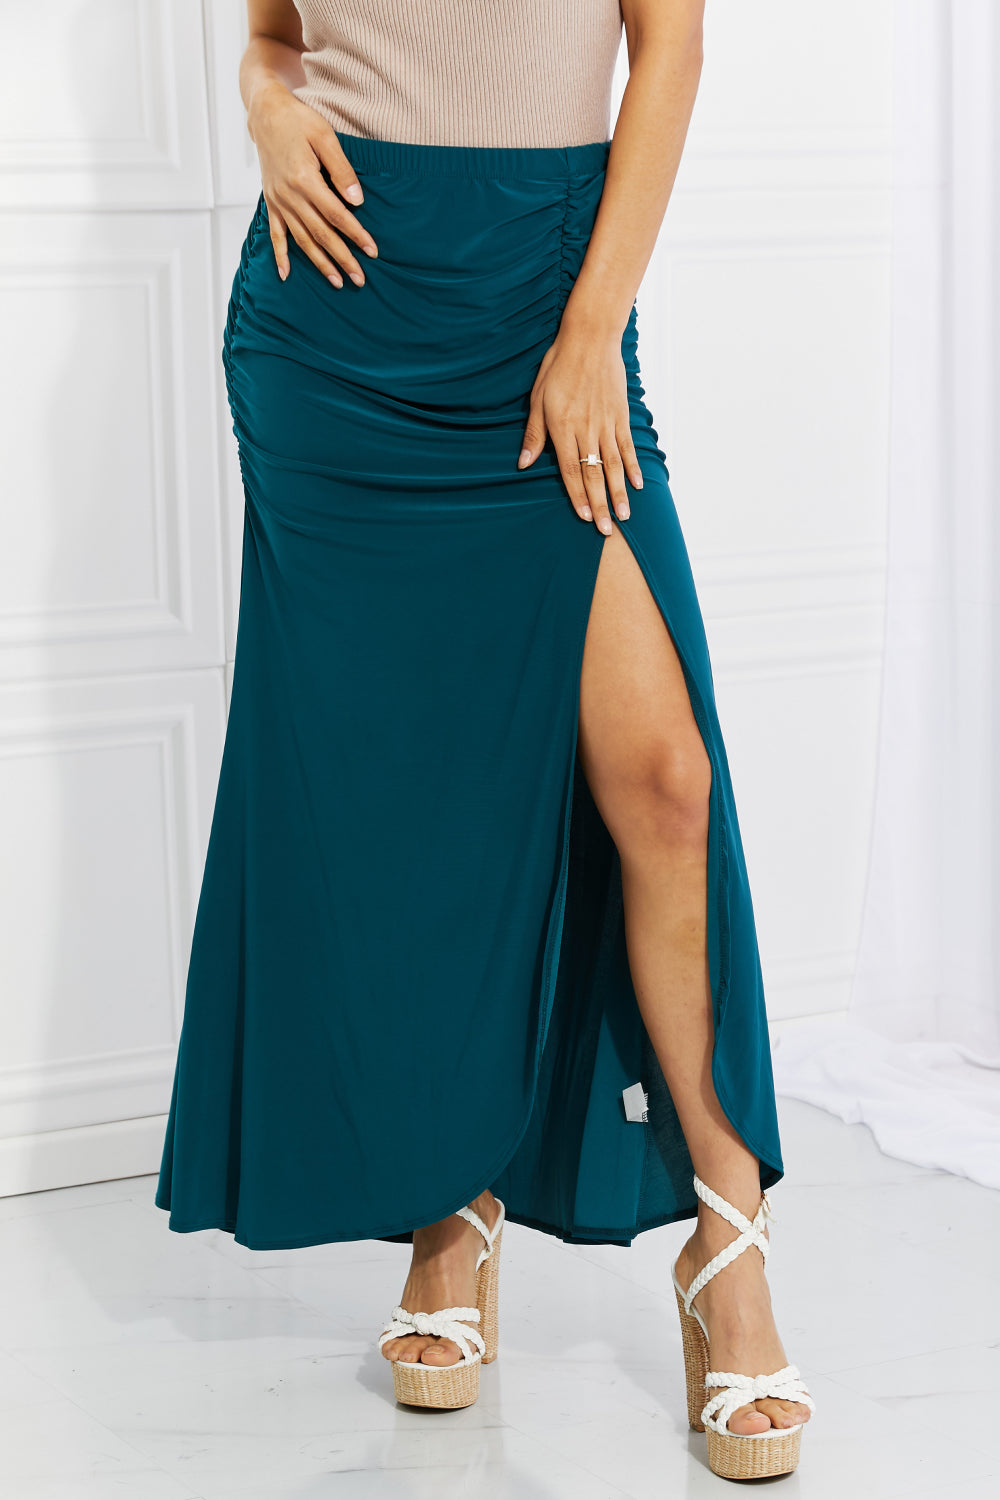 White Birch Ruched-Bum Maxi Skirt in Teal